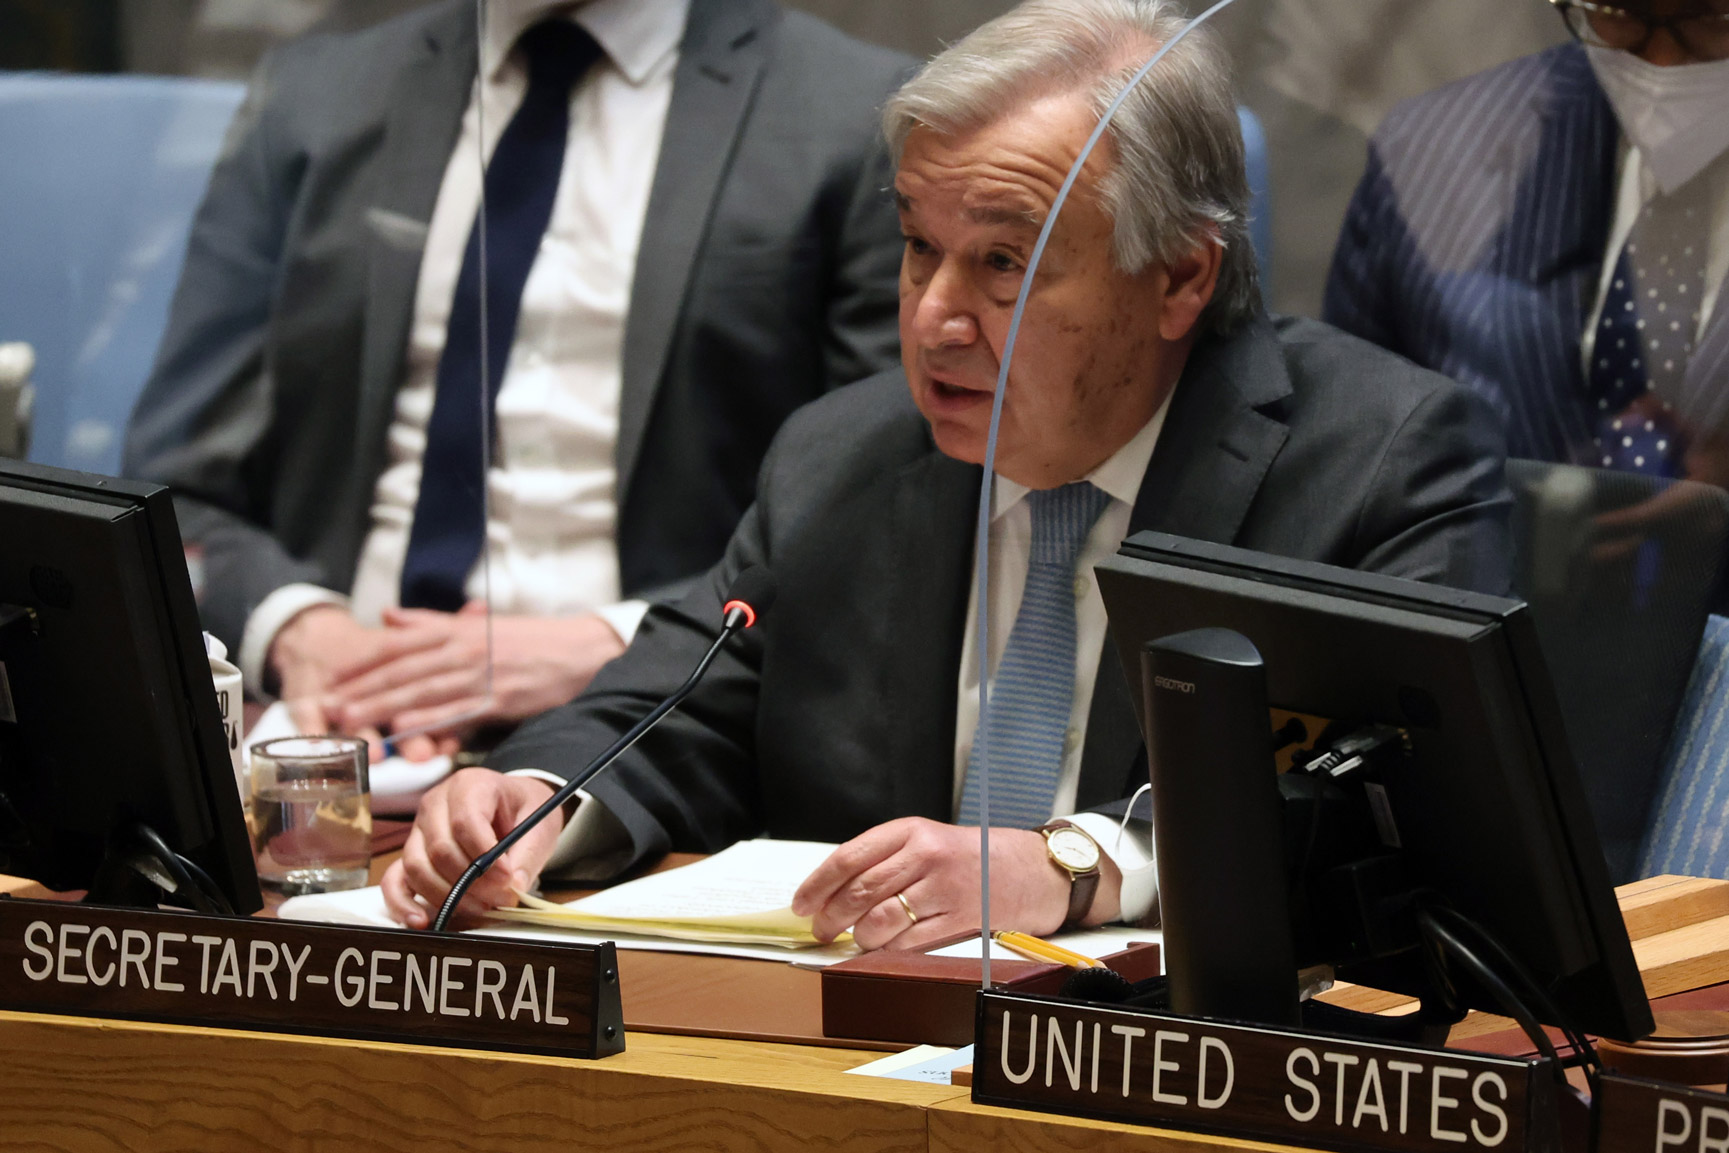 UN Secretary-General António Guterres addresses the Security Council in New York on May 5.